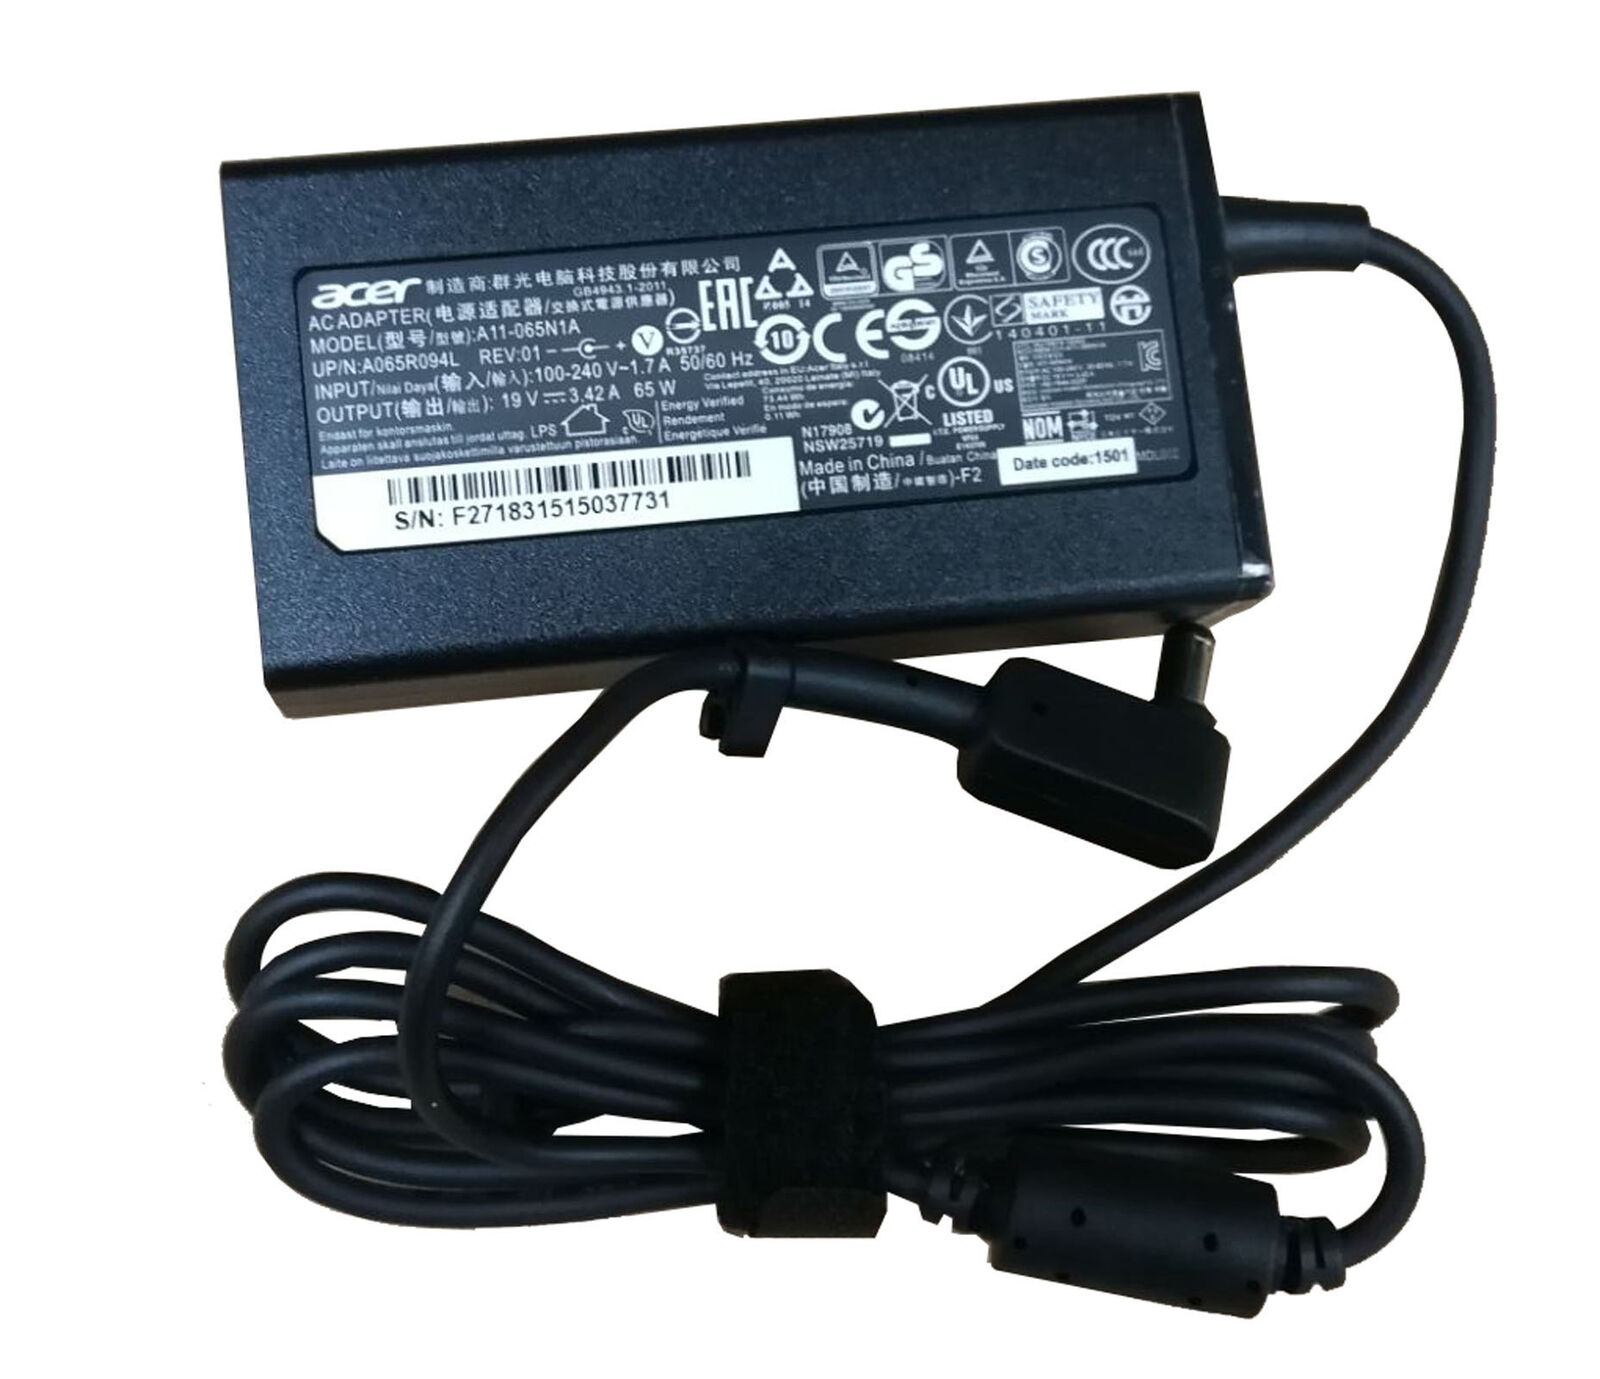 65W Acer Chromebook C720-2827 Charger AC Adapter Power Cord